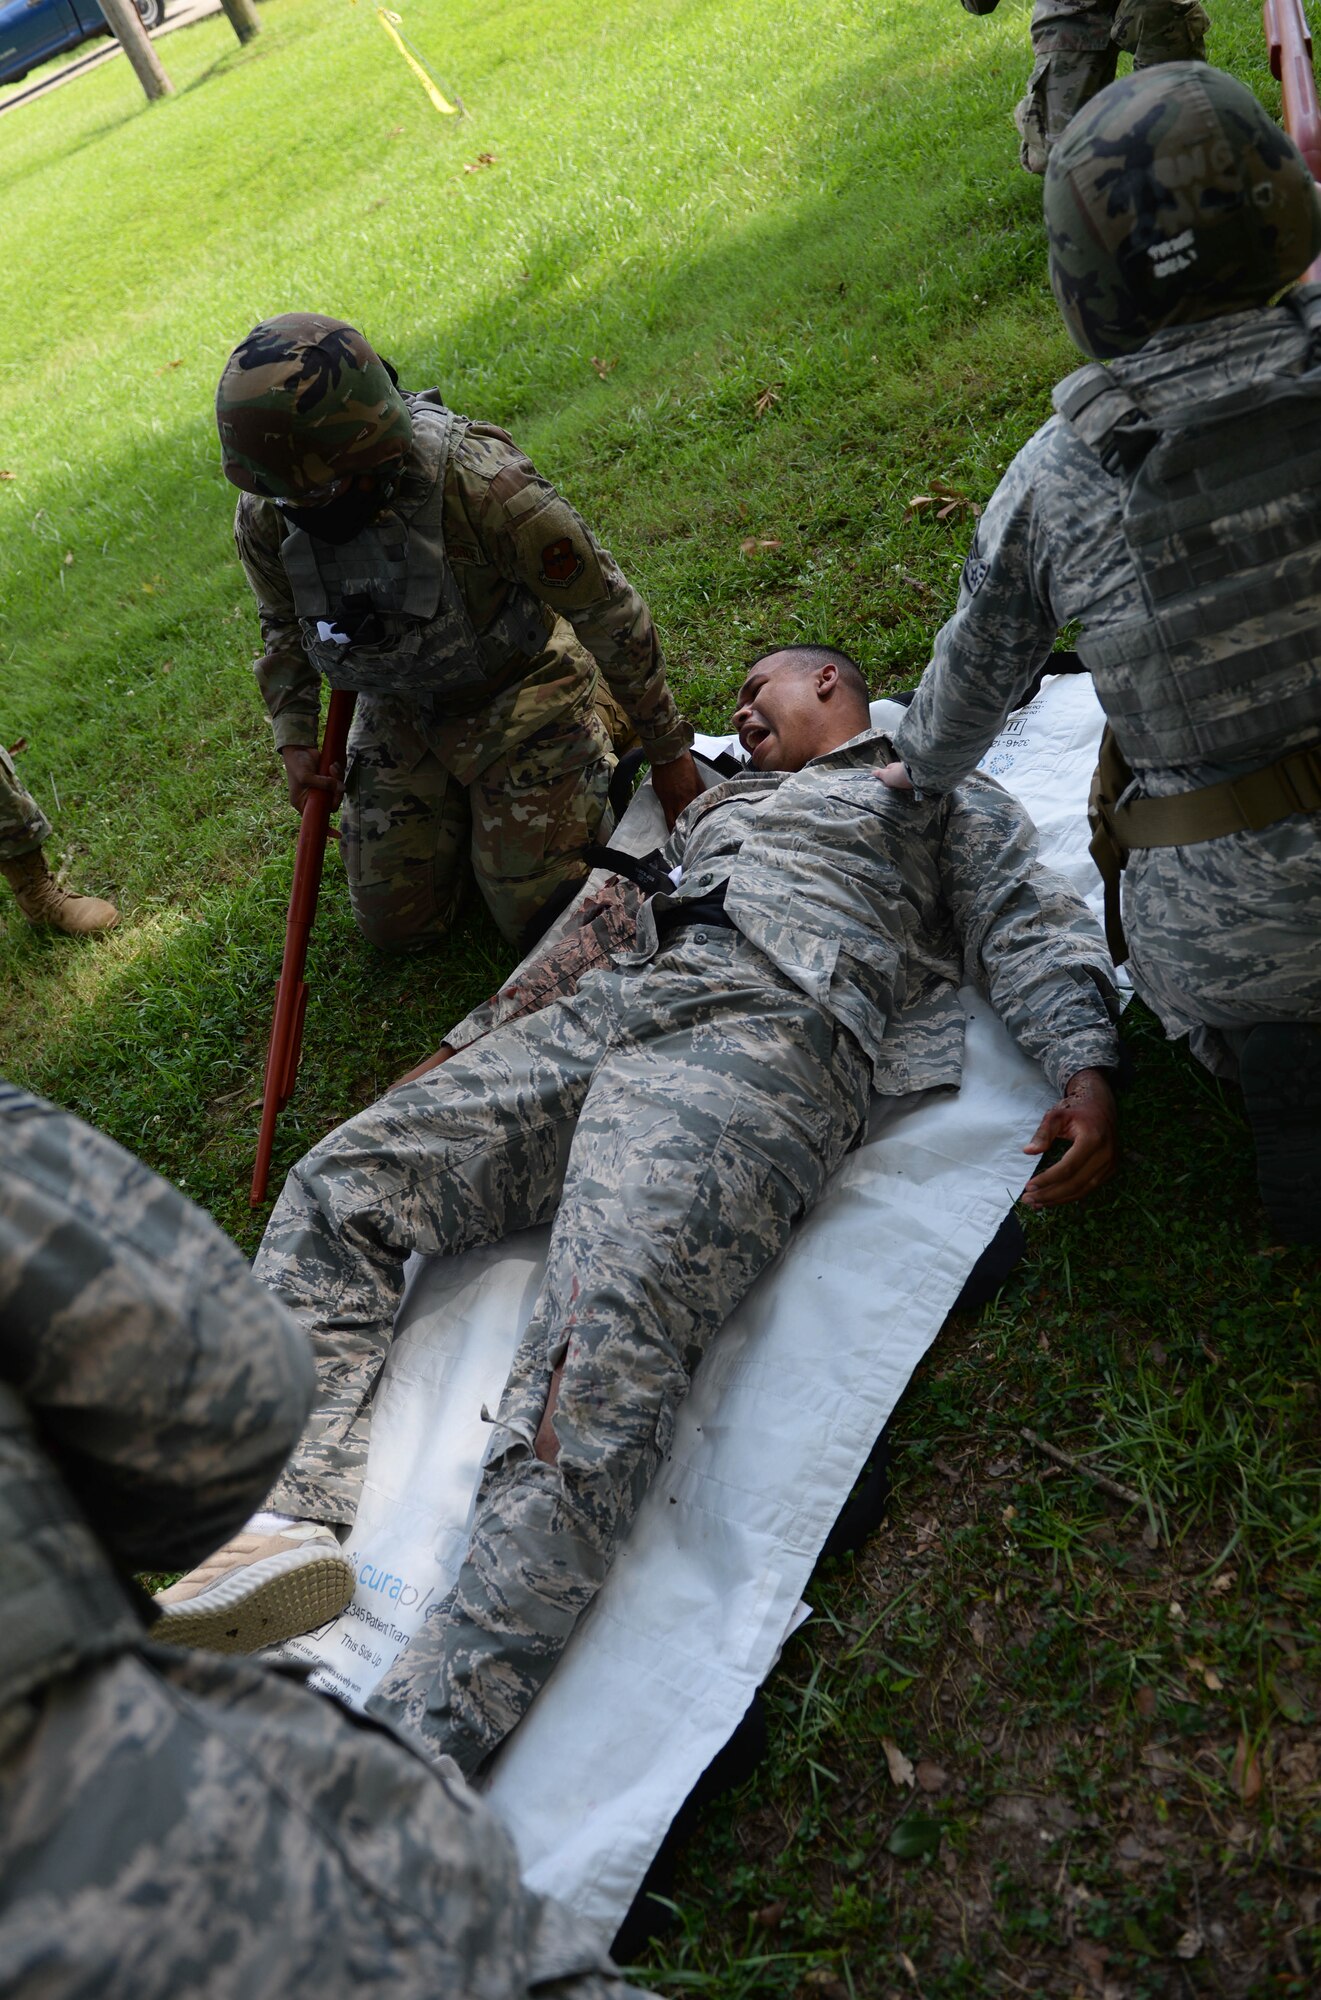 14th Medical Group Airmen practice treatment on an augmented mannequin during the Tactical Combat Casualty Care All Combatants course July 16, 2020, at the Kortiz Clinic on Columbus Air Force base, Miss. The TCCC teaches first-responders treatment of the most preventable causes of death on the battlefield, such as controlling a hemorrhage, treating penetrating chest wounds, airway protection and tourniquet application. (U.S. Air Force photo by Airman 1st Class Davis Donaldson)